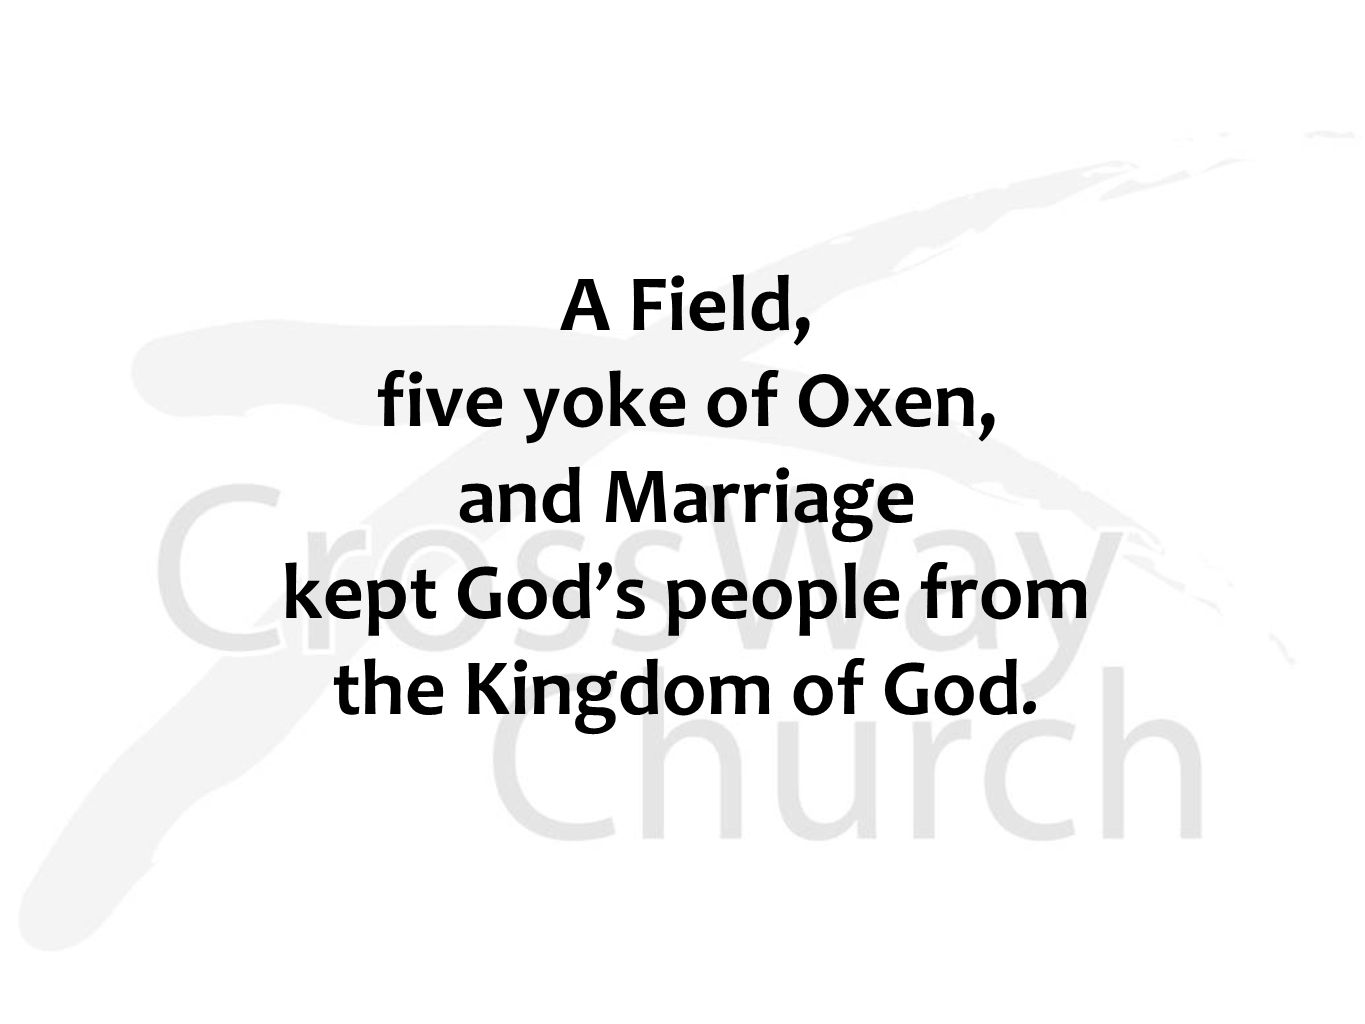 A Field, five yoke of Oxen, and Marriage kept God’s people from the Kingdom of God.